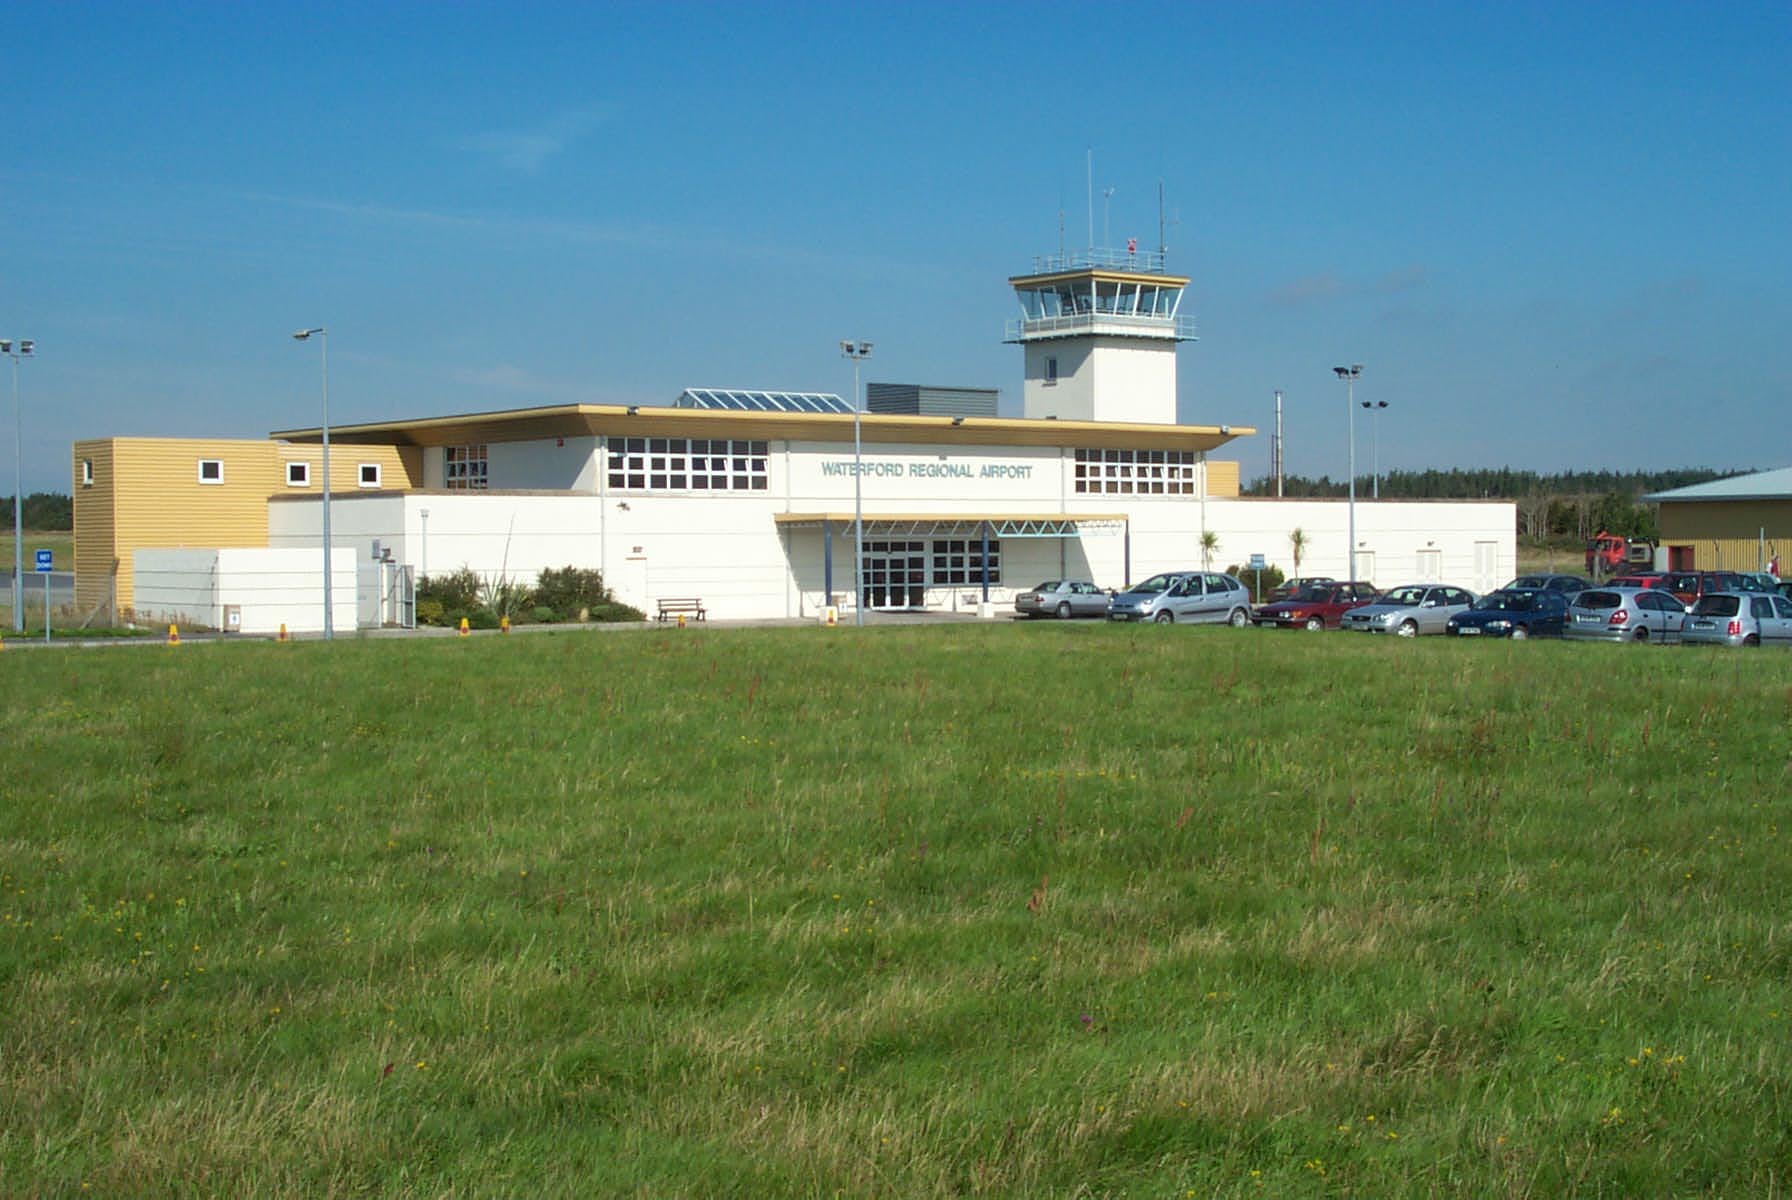 Photo of airport